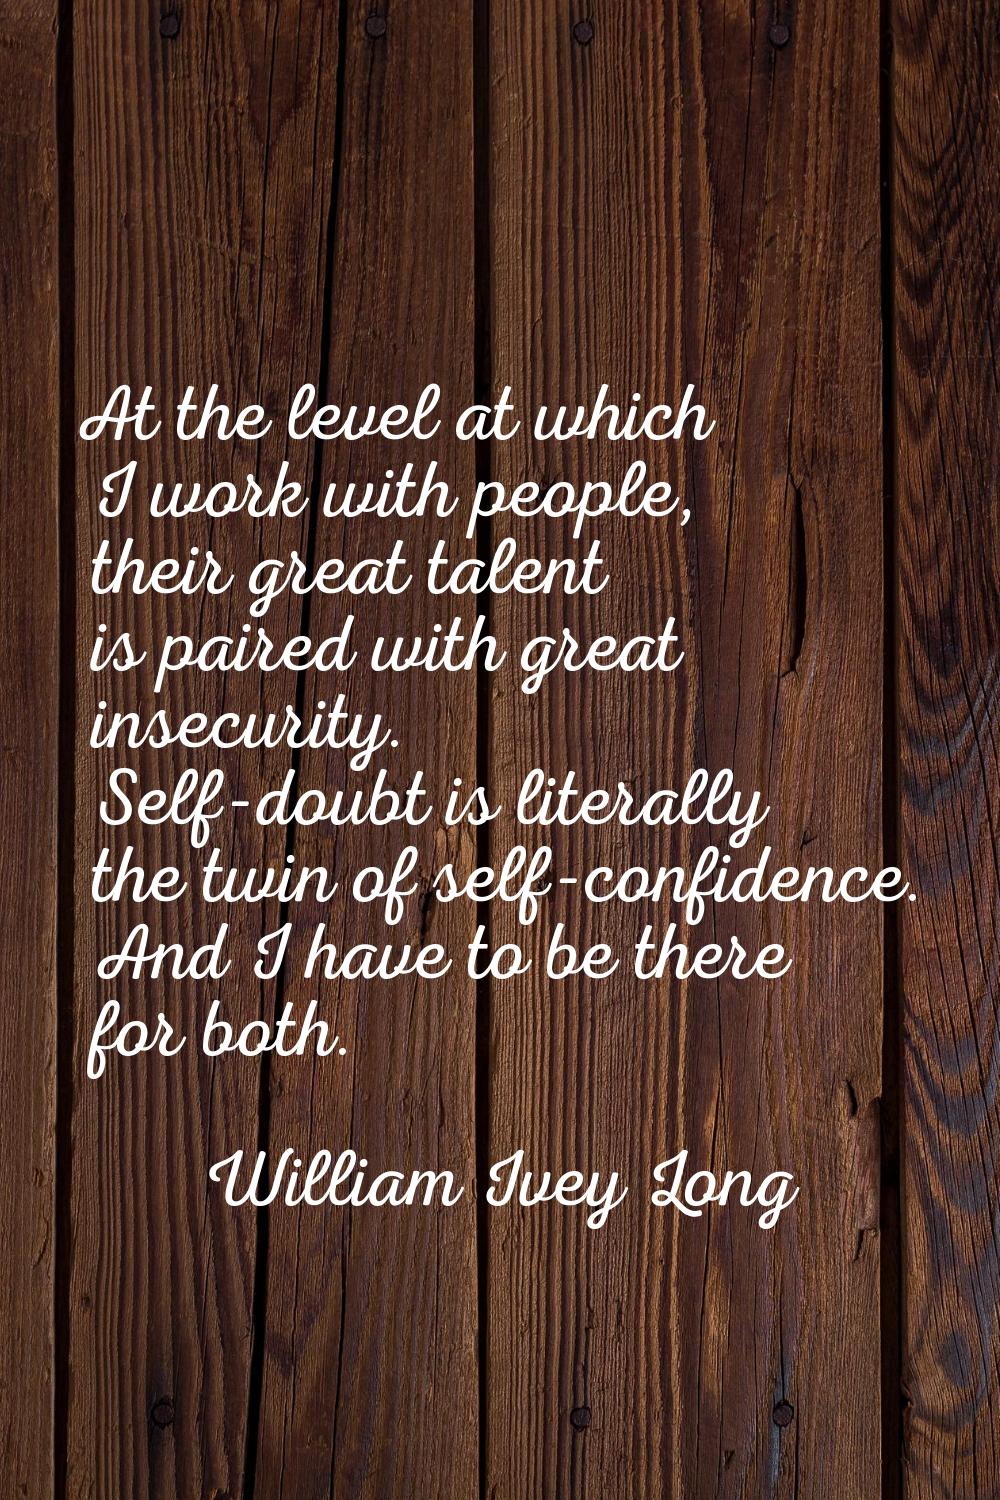 At the level at which I work with people, their great talent is paired with great insecurity. Self-